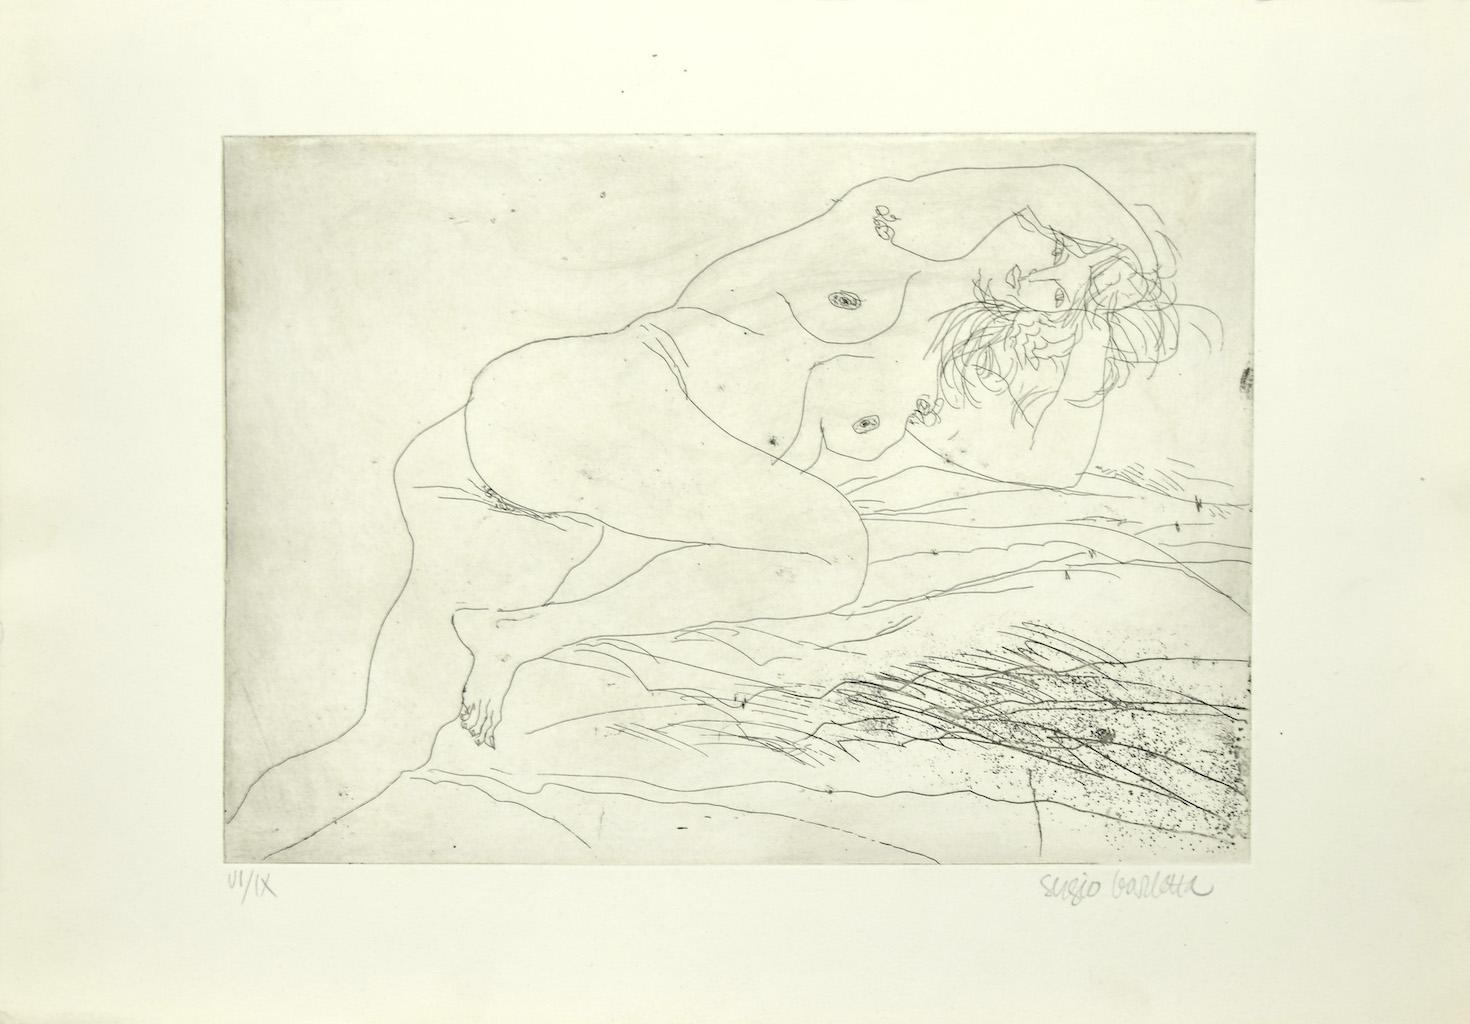 Nude is an original etching realized by Sergio Barletta in 1975 ca.

Hand-signed on the lower right in pencil. Numbered in Roman numerals, edition of VI/IX prints, on the lower left in pencil.

In very good conditions.

The artwork represents a